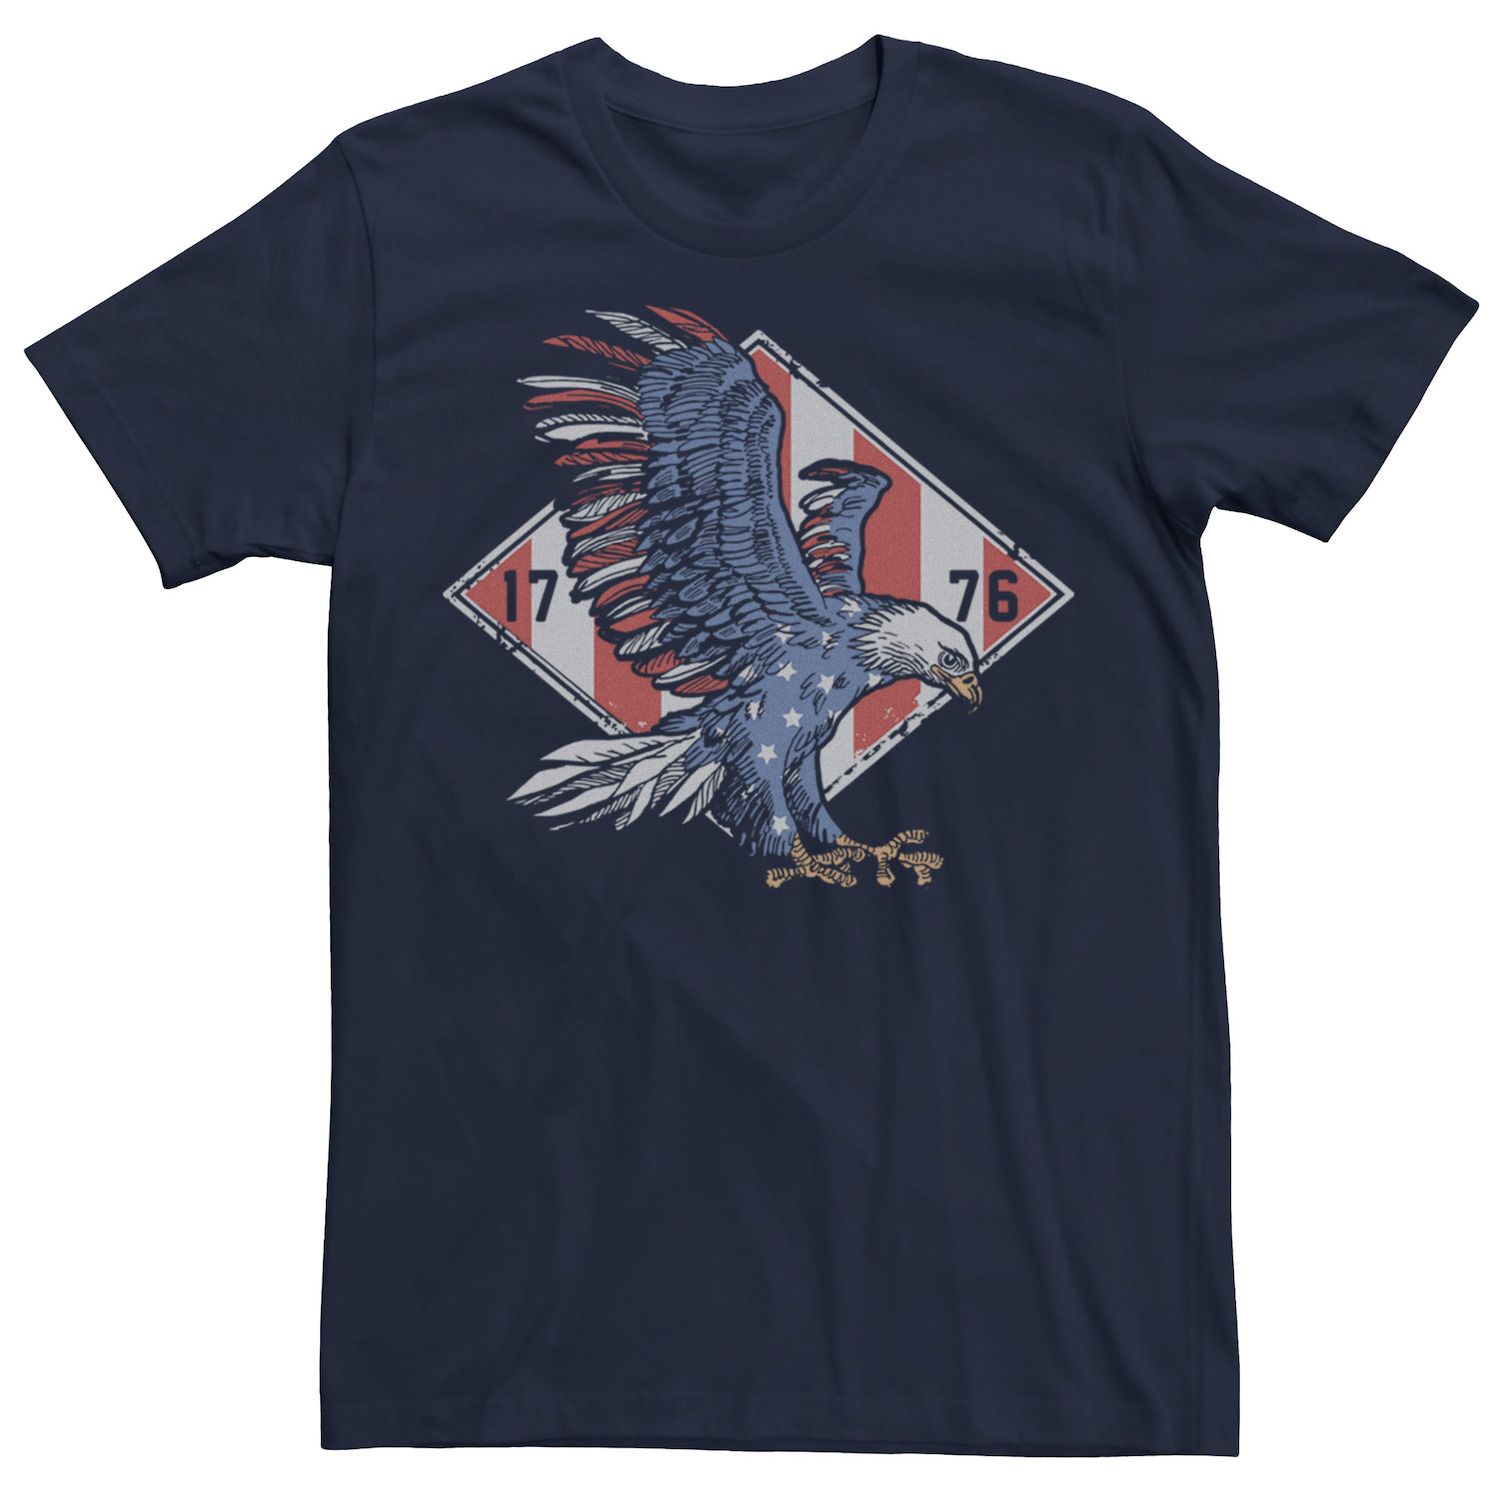 Image for Licensed Character Men's 1776 Eagle Americana Badge Tee at Kohl's.